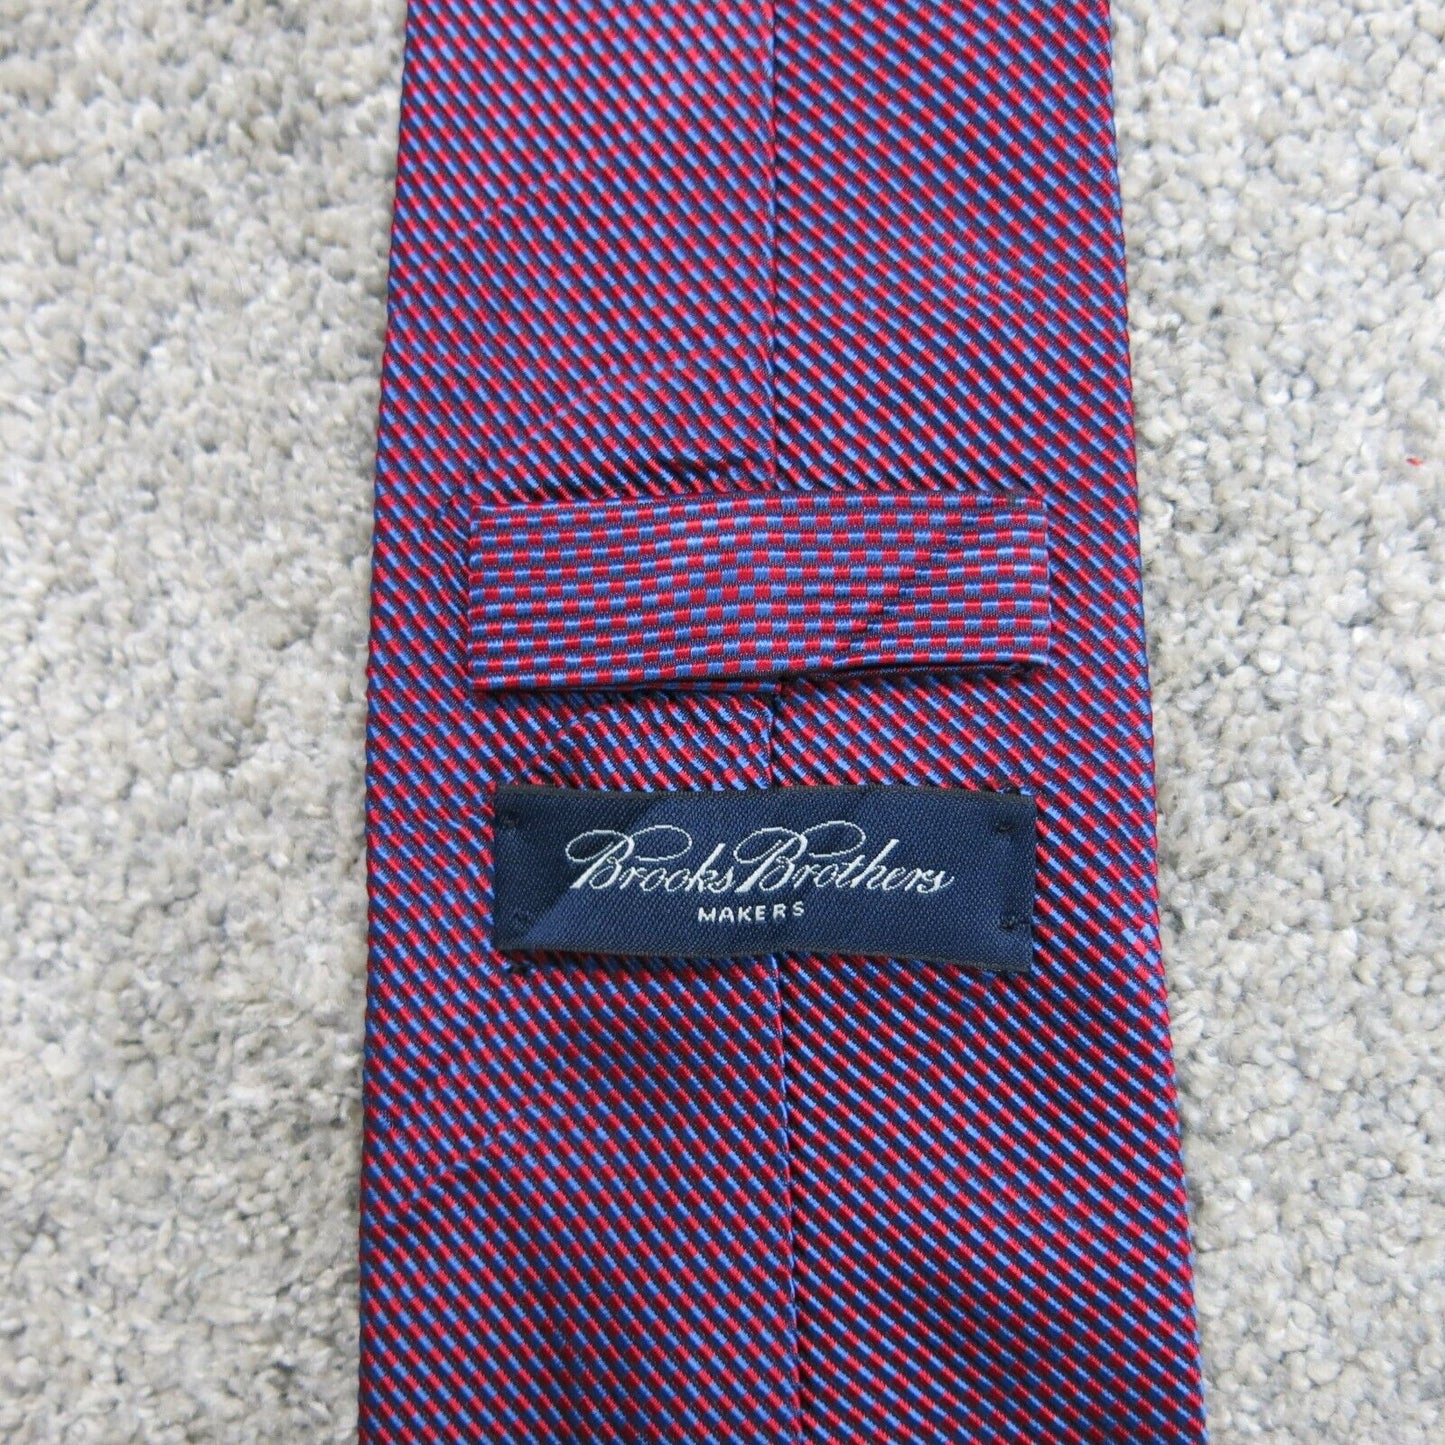 Brooks Brothers Makers Men Traditional Tie Striped Silk Blue Red One Size 58.5"